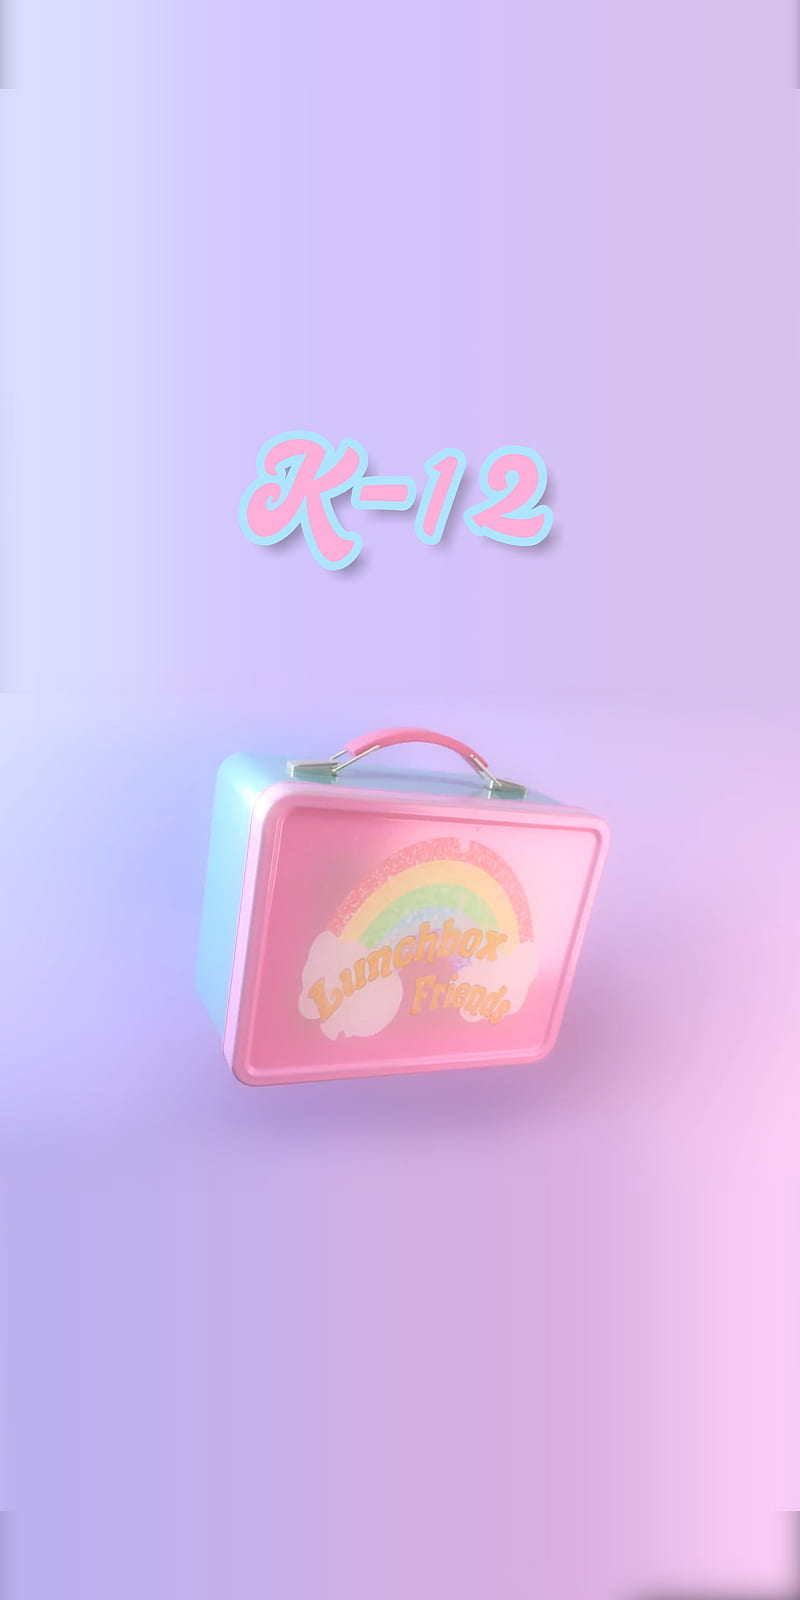 A pink and purple box with the words k-12 on it - Melanie Martinez